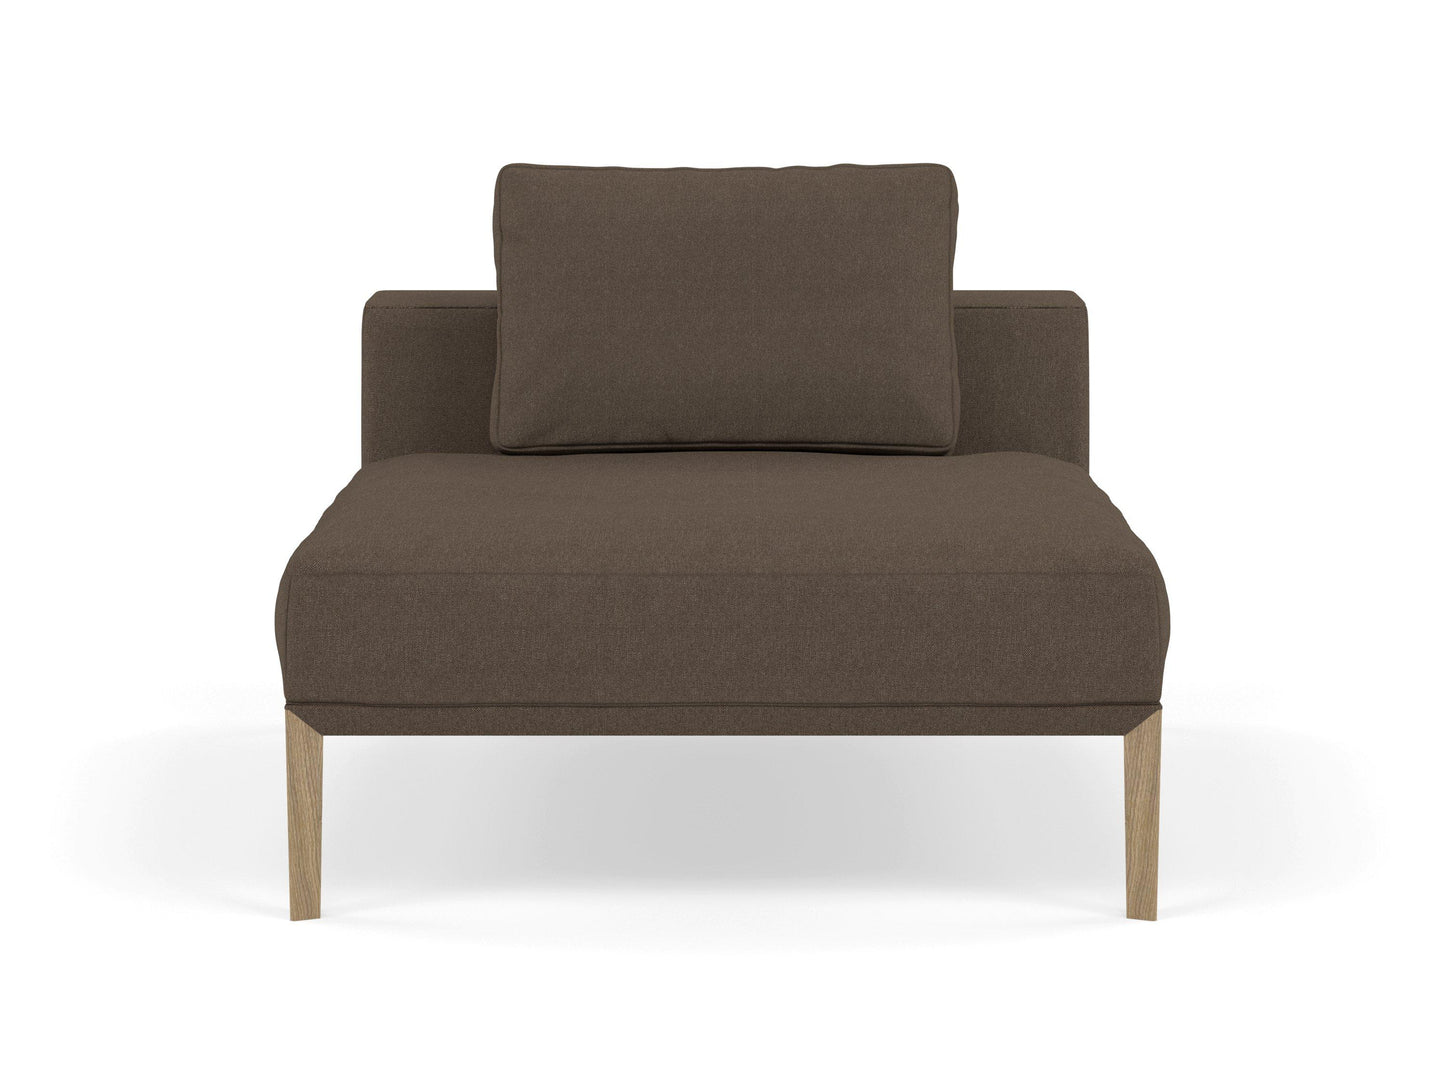 Modern Armchair 1 Seater Sofa without armrests in Coffee Brown Fabric-Natural Oak-Distinct Designs (London) Ltd